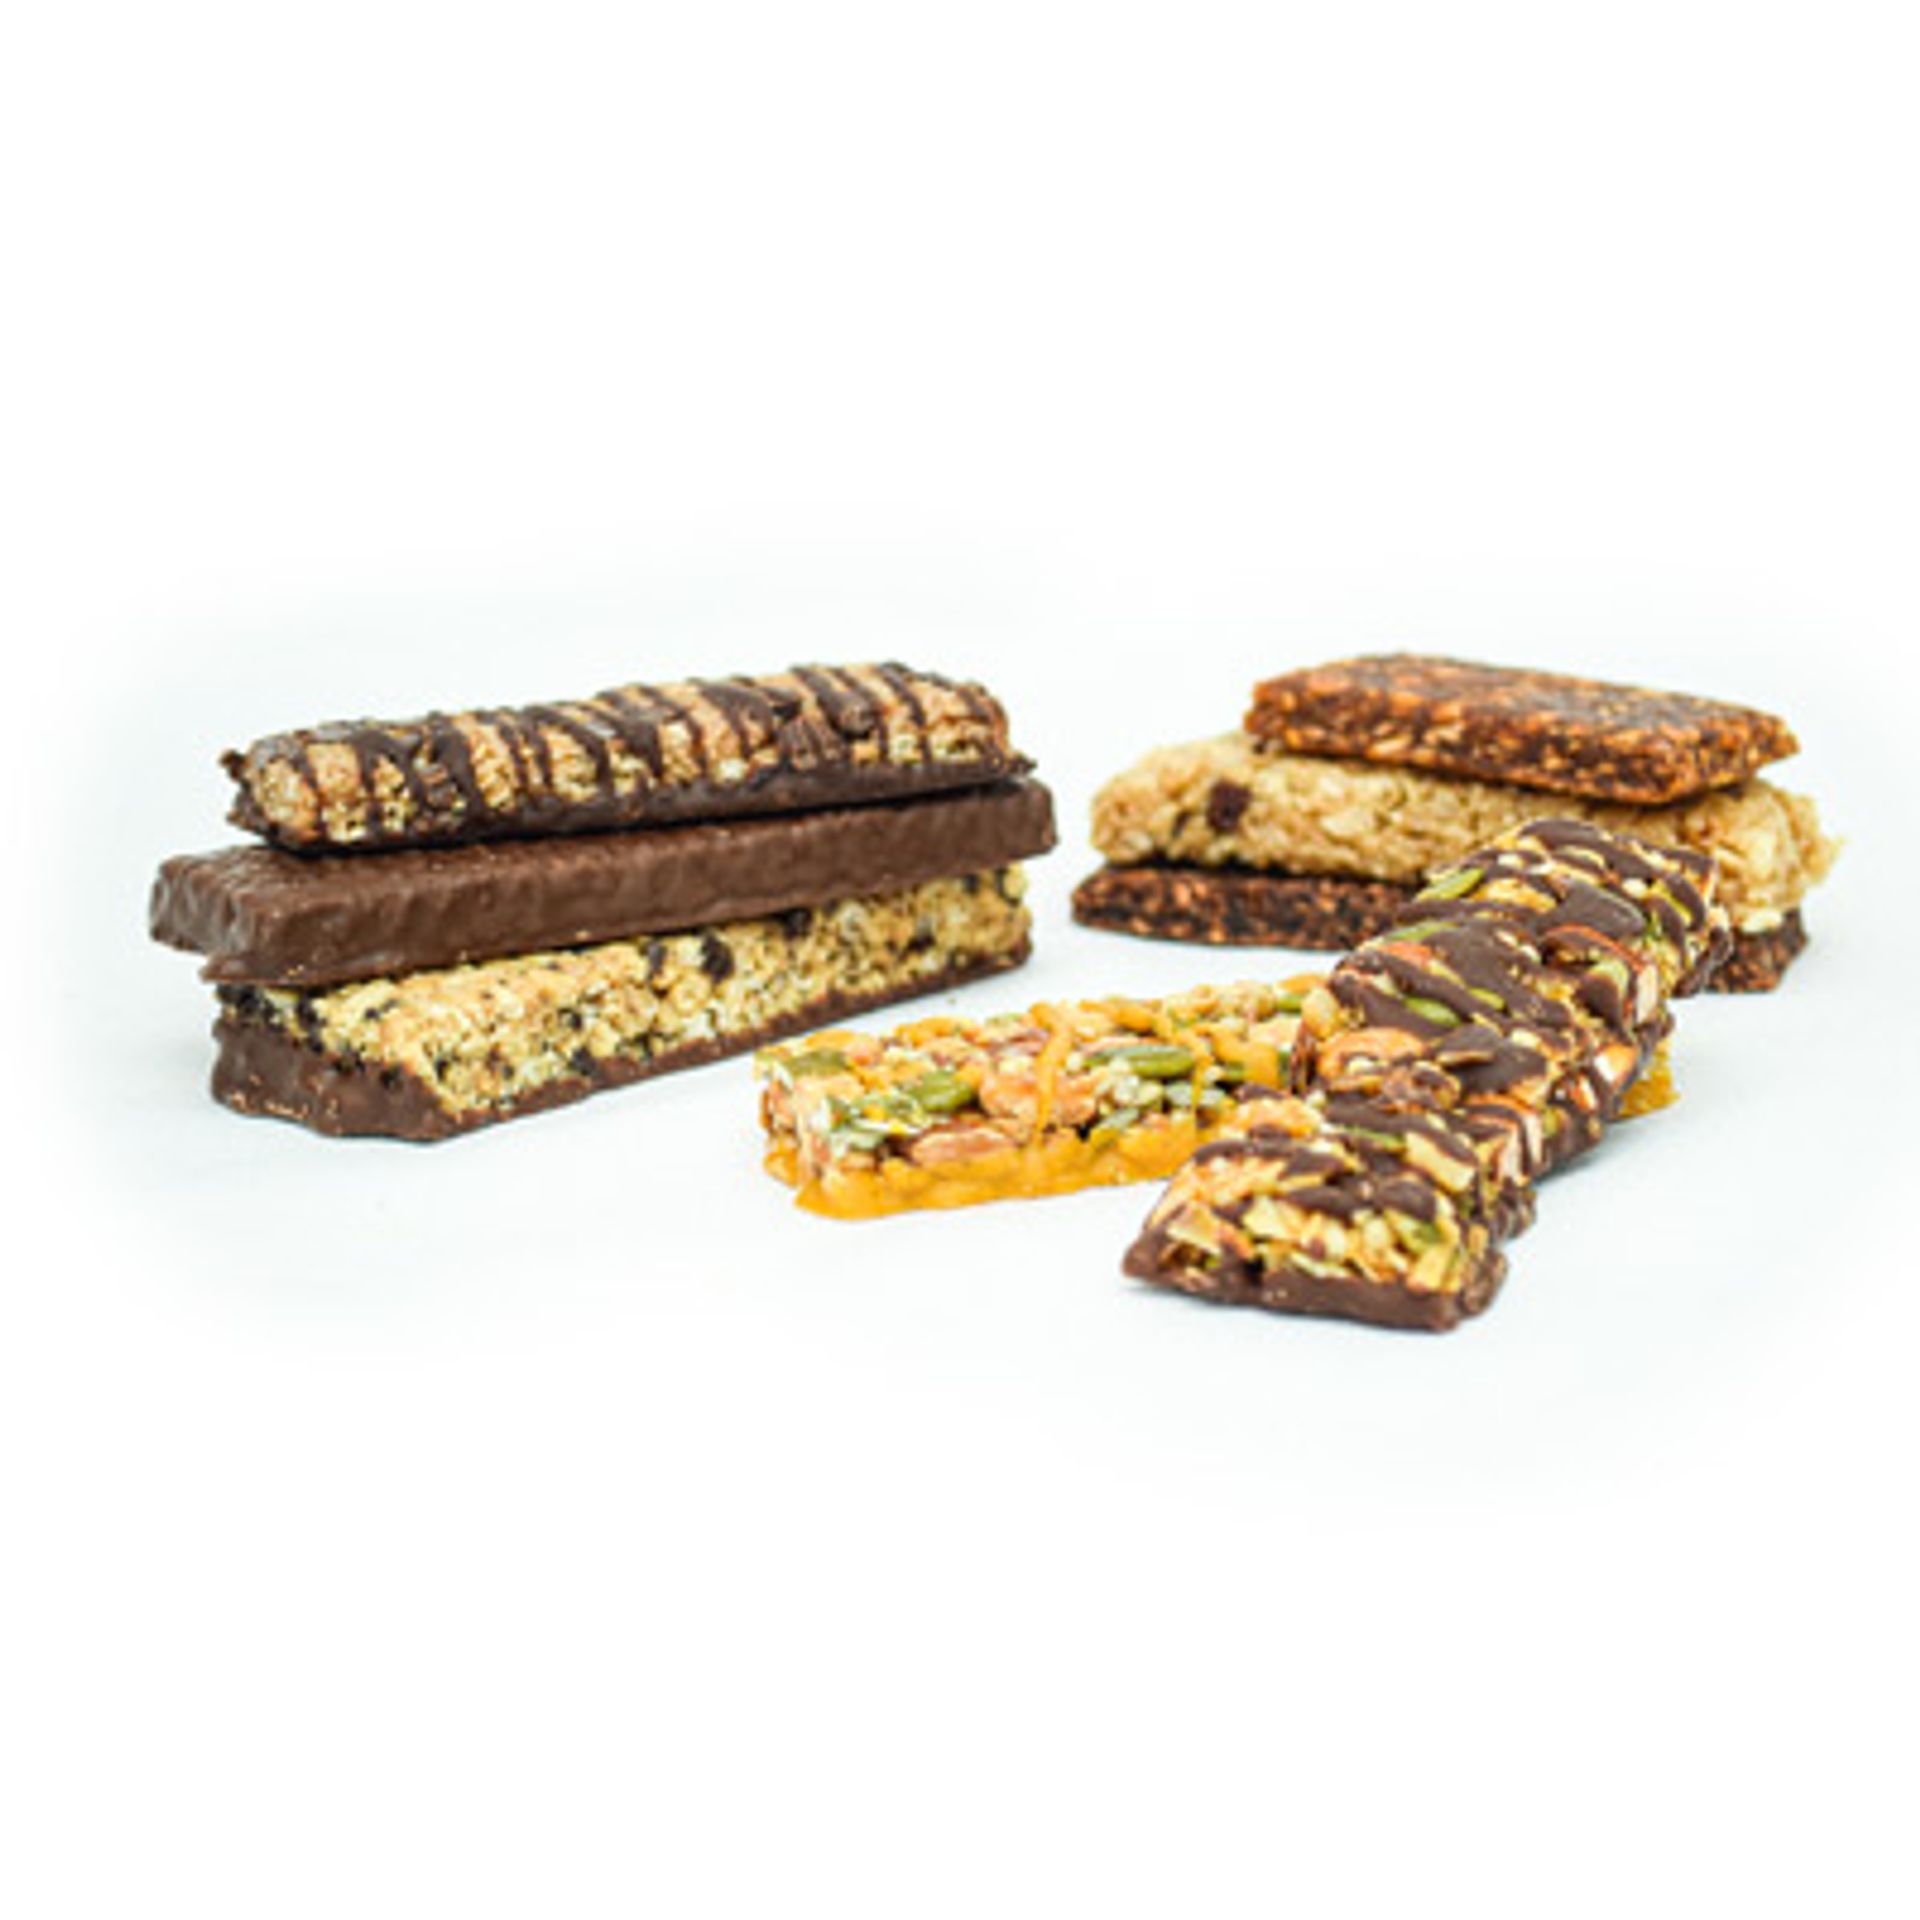 A variety of the bars we produce.